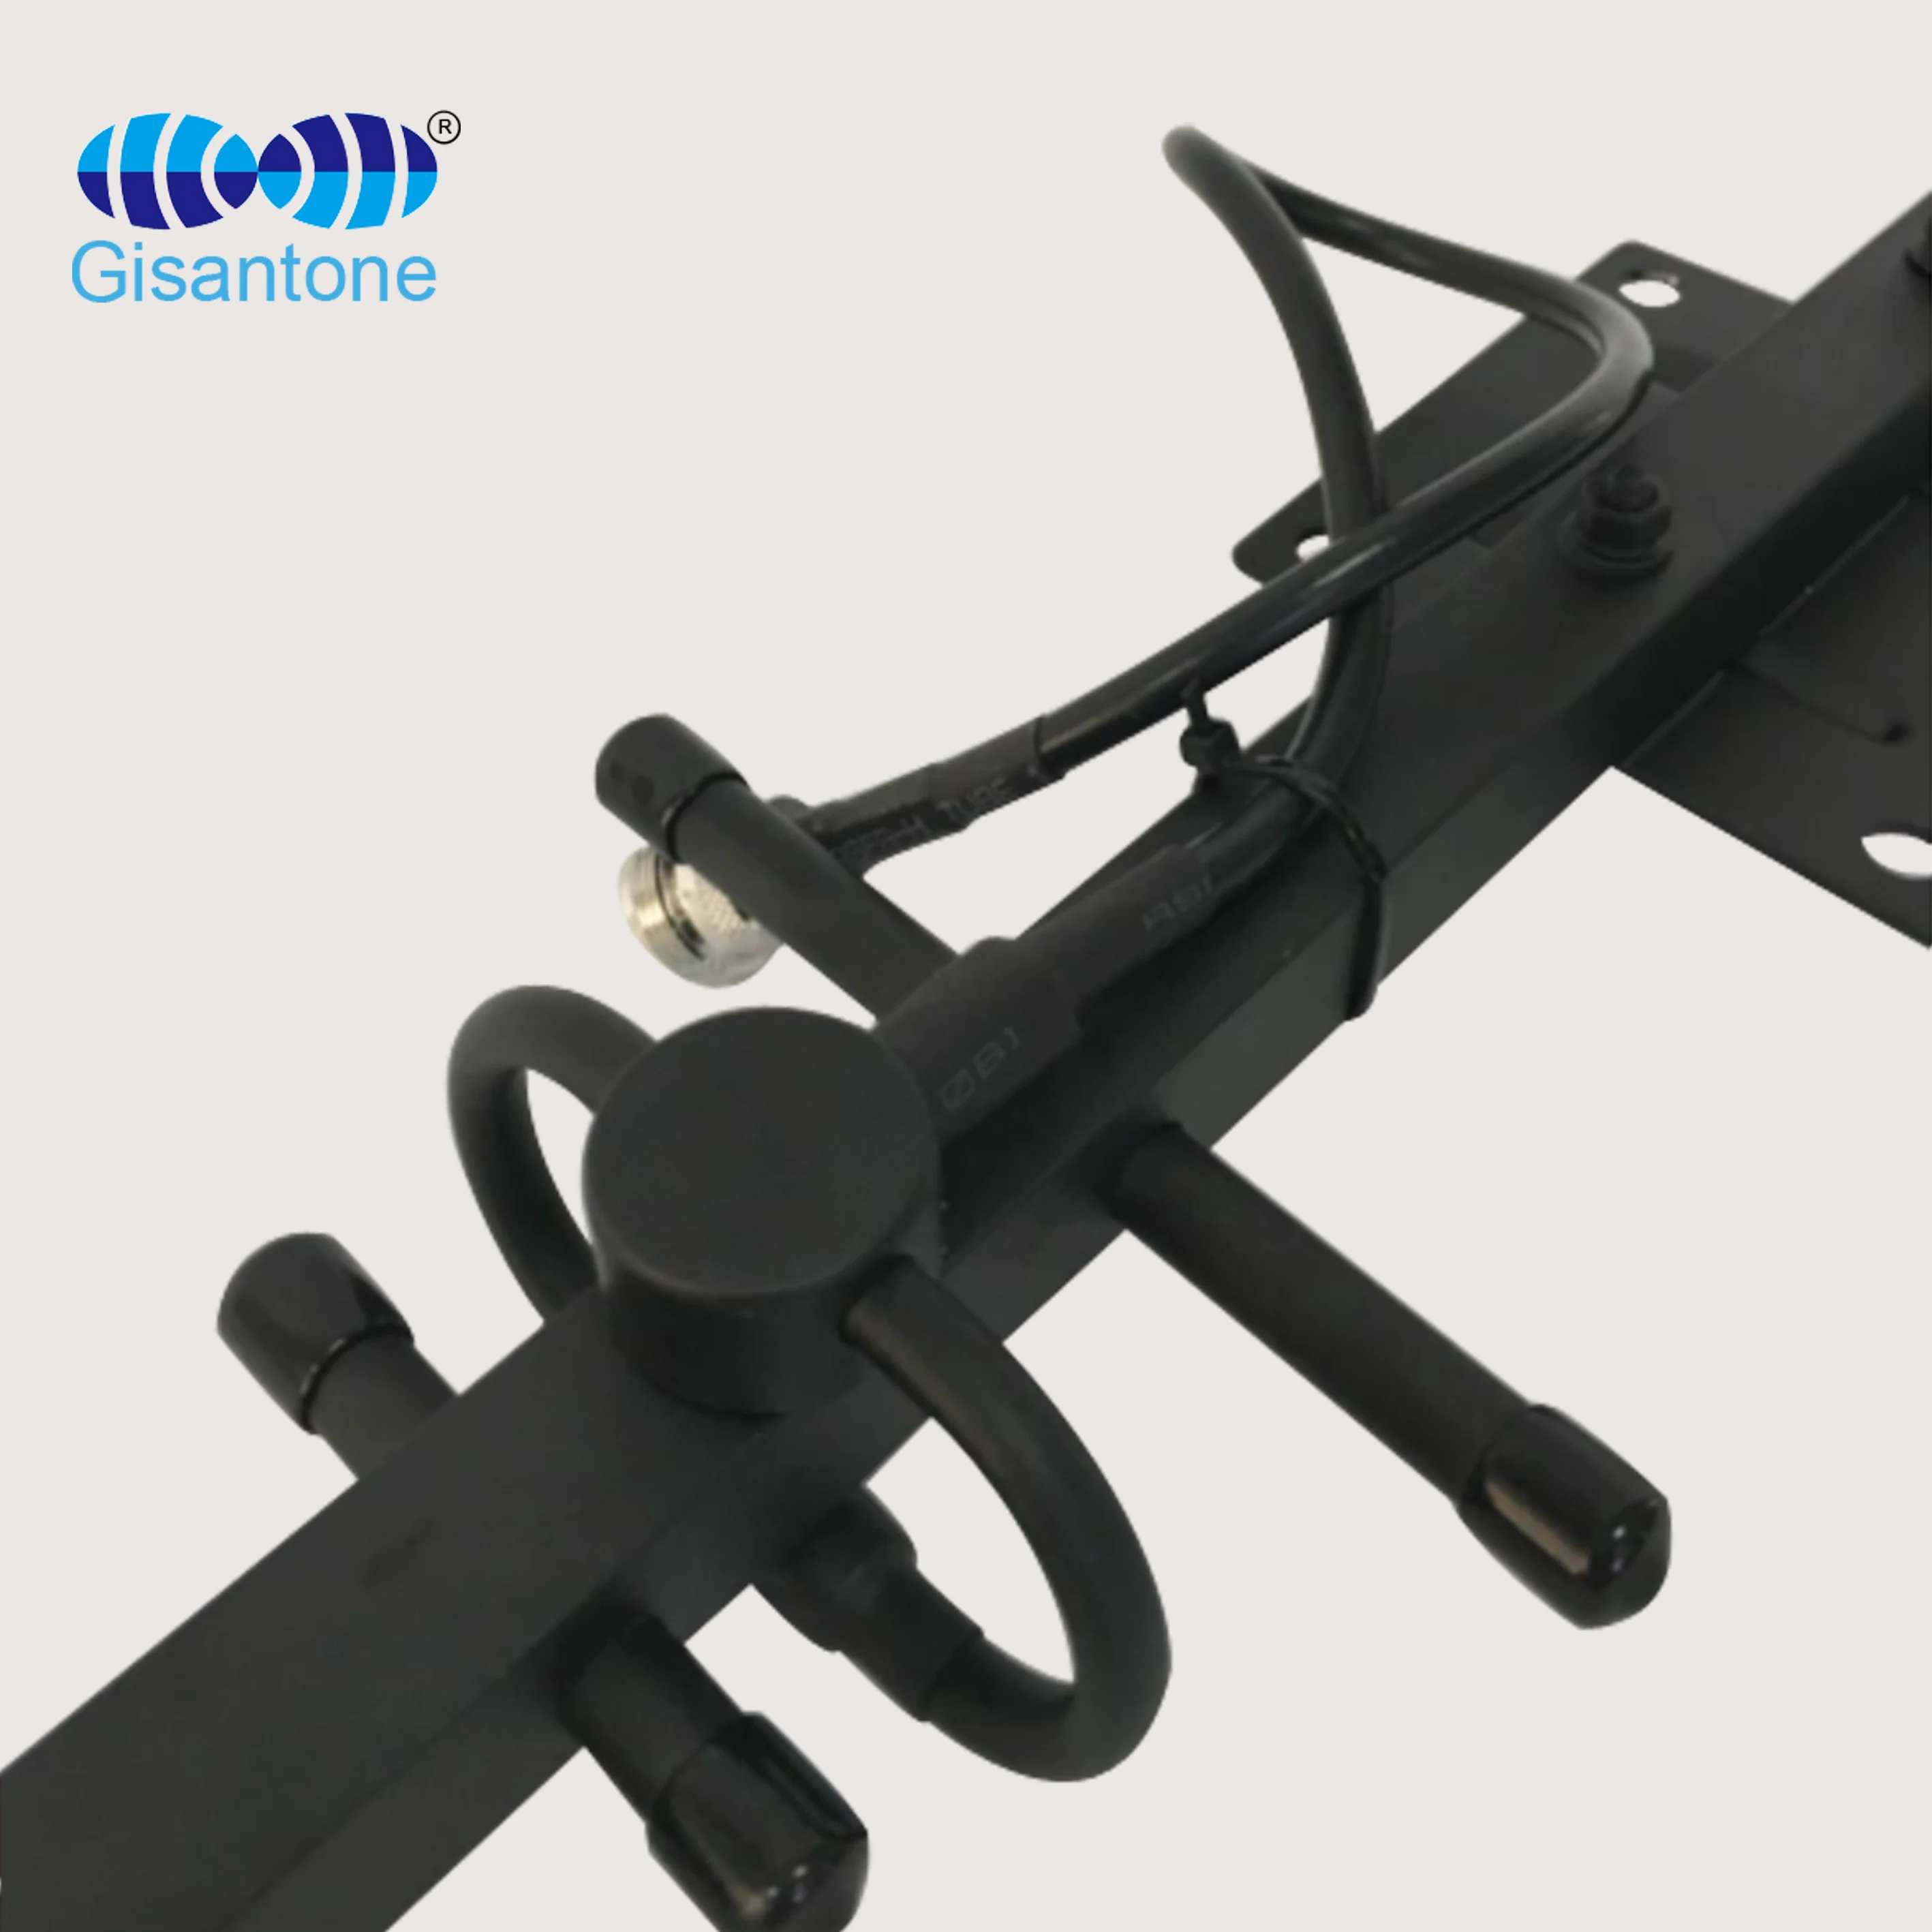 Outdoor antena vertical yagi tv antenna signal booster dedicated GSM/CDMA antenna for general reception and transmission